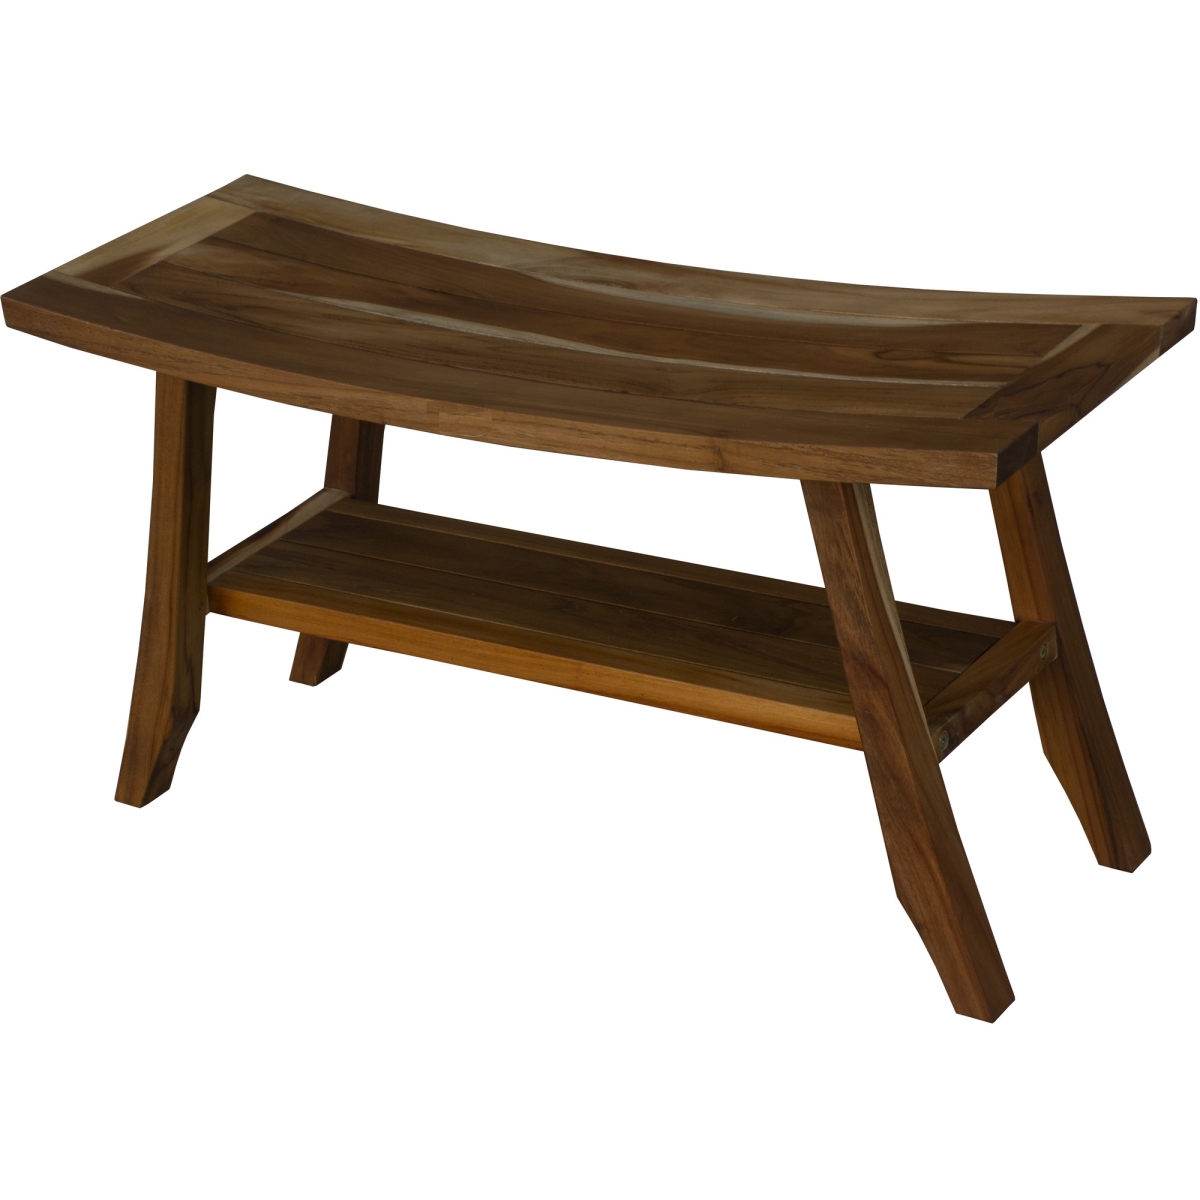 Picture of HomeRoots 376739 Compact Curvilinear Teak Shower Outdoor Bench with Shelf in Natural Finish